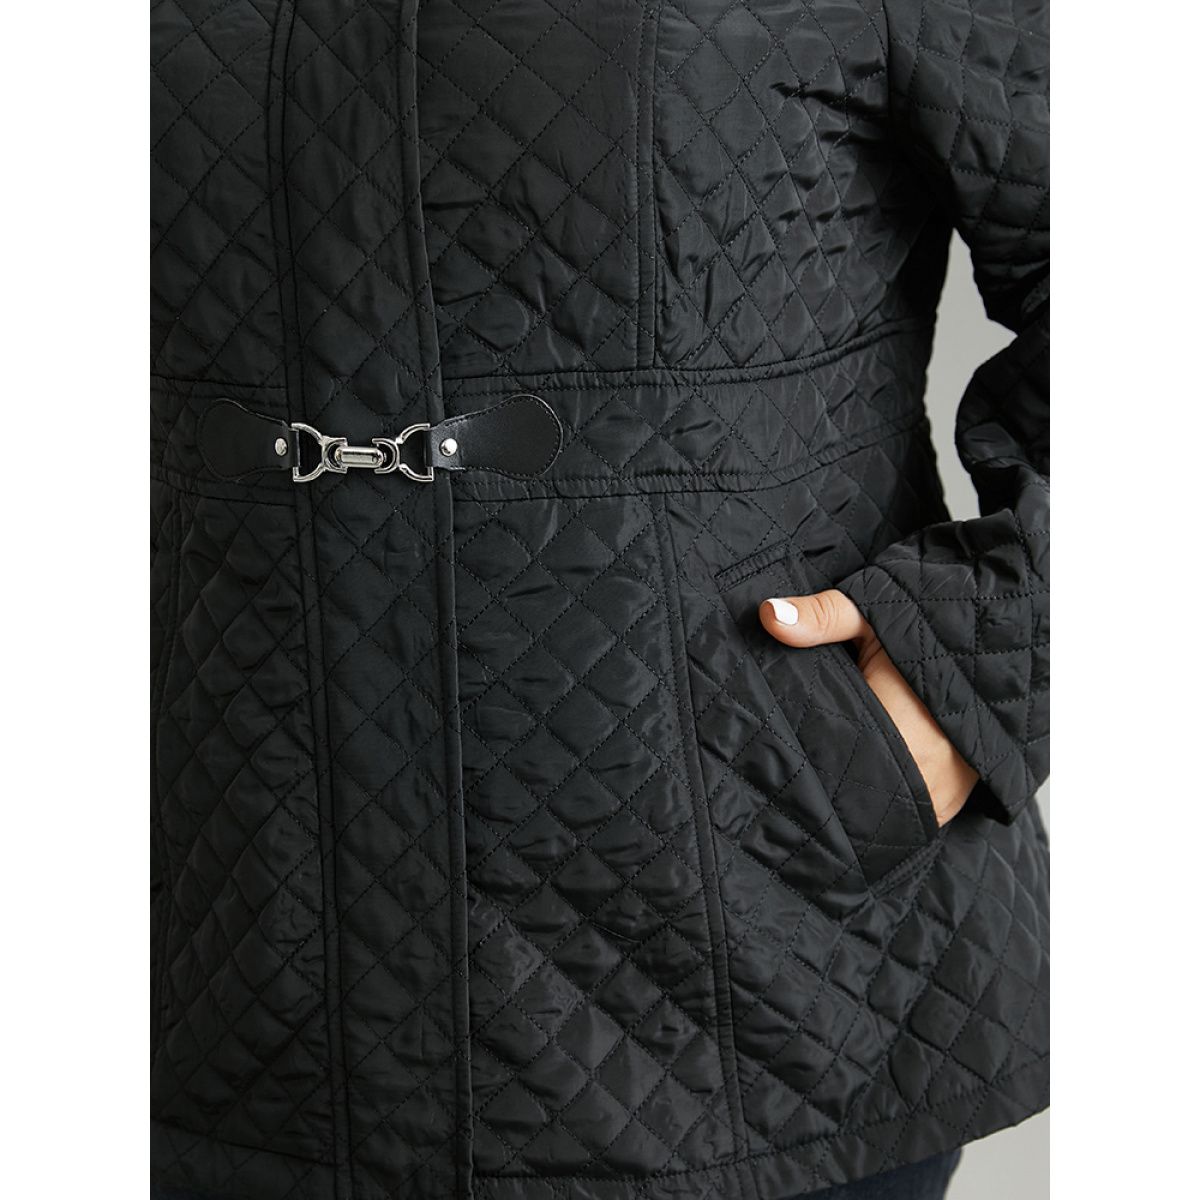 

Plus Size Solid Buckle Detail Zipper Quilted Coat Women Black Casual Texture Ladies Everyday Winter Coats BloomChic